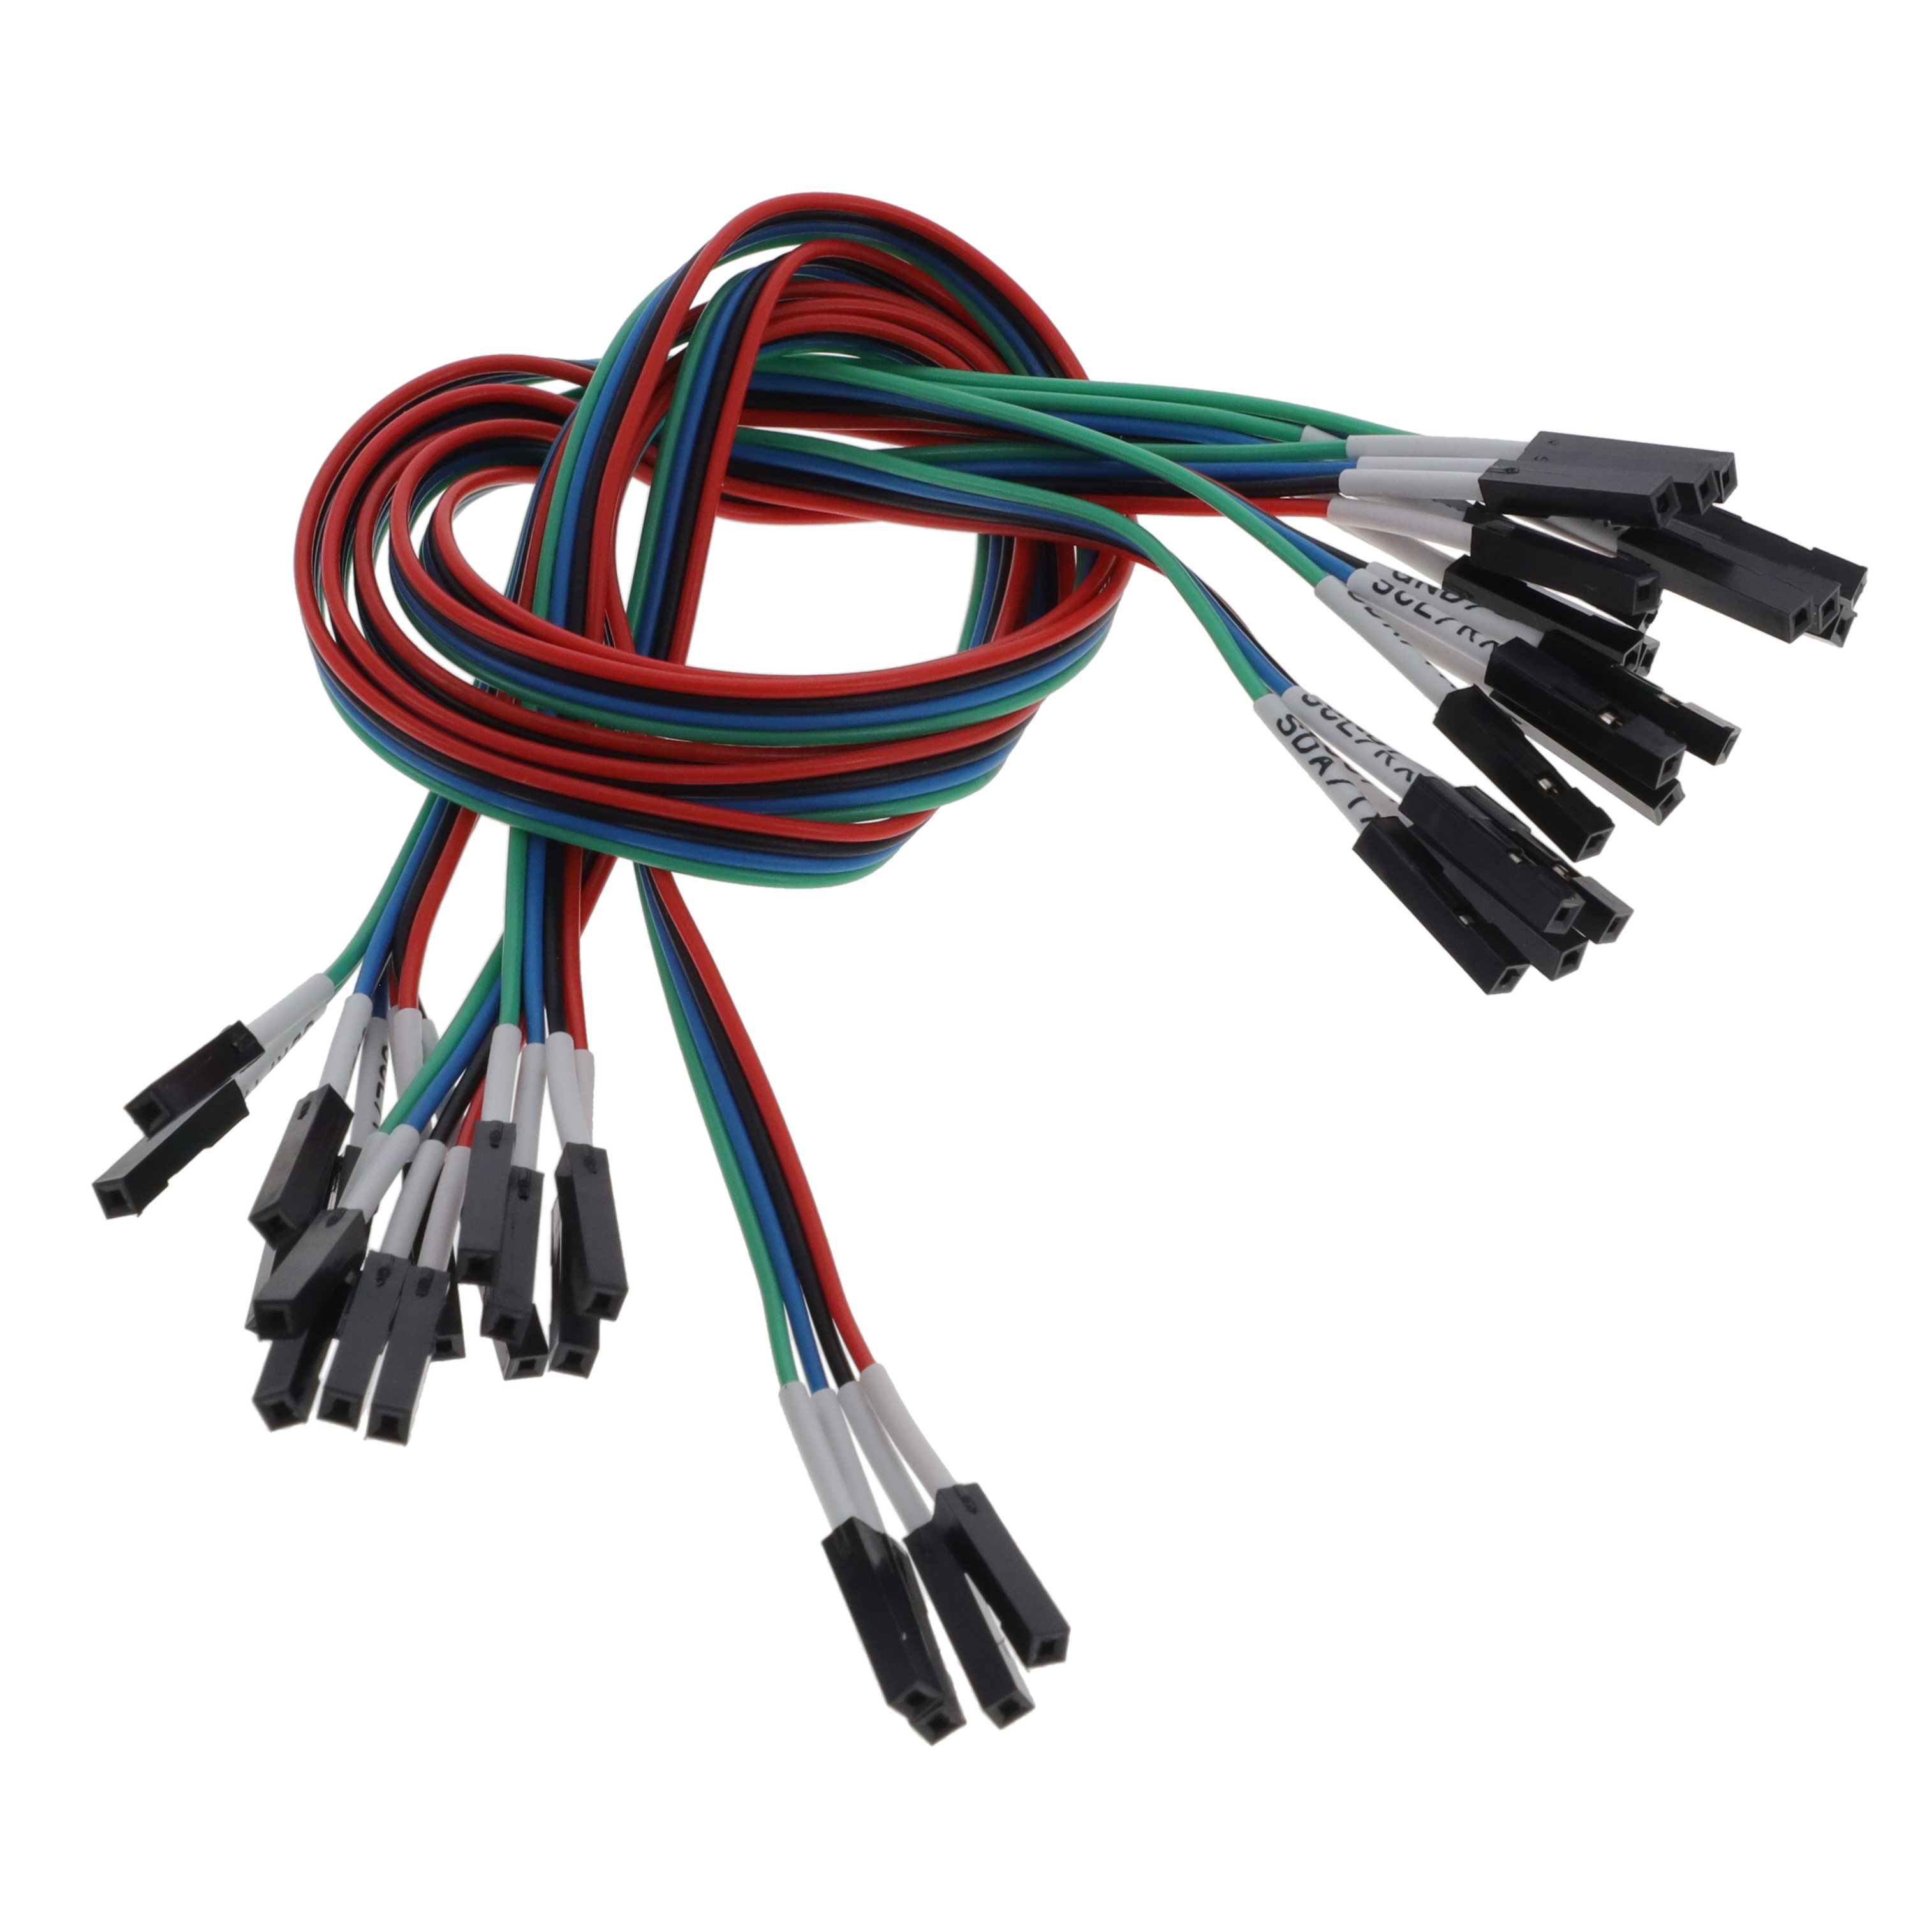 120 DuPont Breadboard Wires CANADUINO®